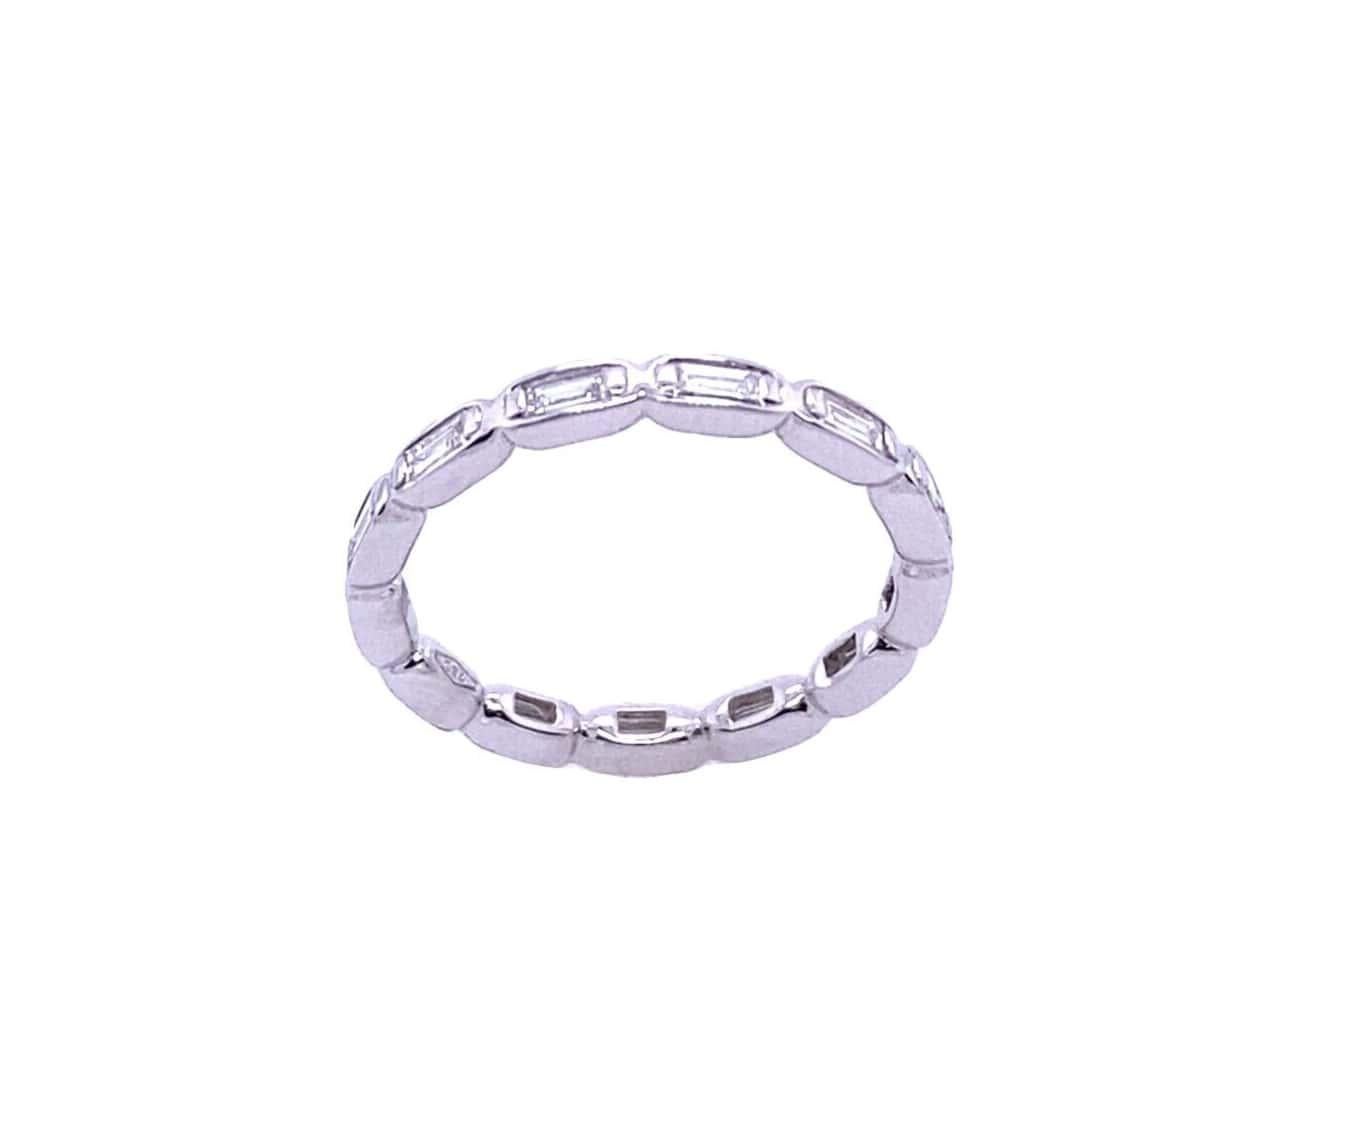 Baguette 0.59ct Diamond Full Eternity Ring in 18ct White Gold

Additional Information:
Total Diamond Weight: 0.59ct
Diamond Colour: G
Diamond Clarity: VS
Total Weight: 2.3g
Finger Size: L 1/2
SMS2095